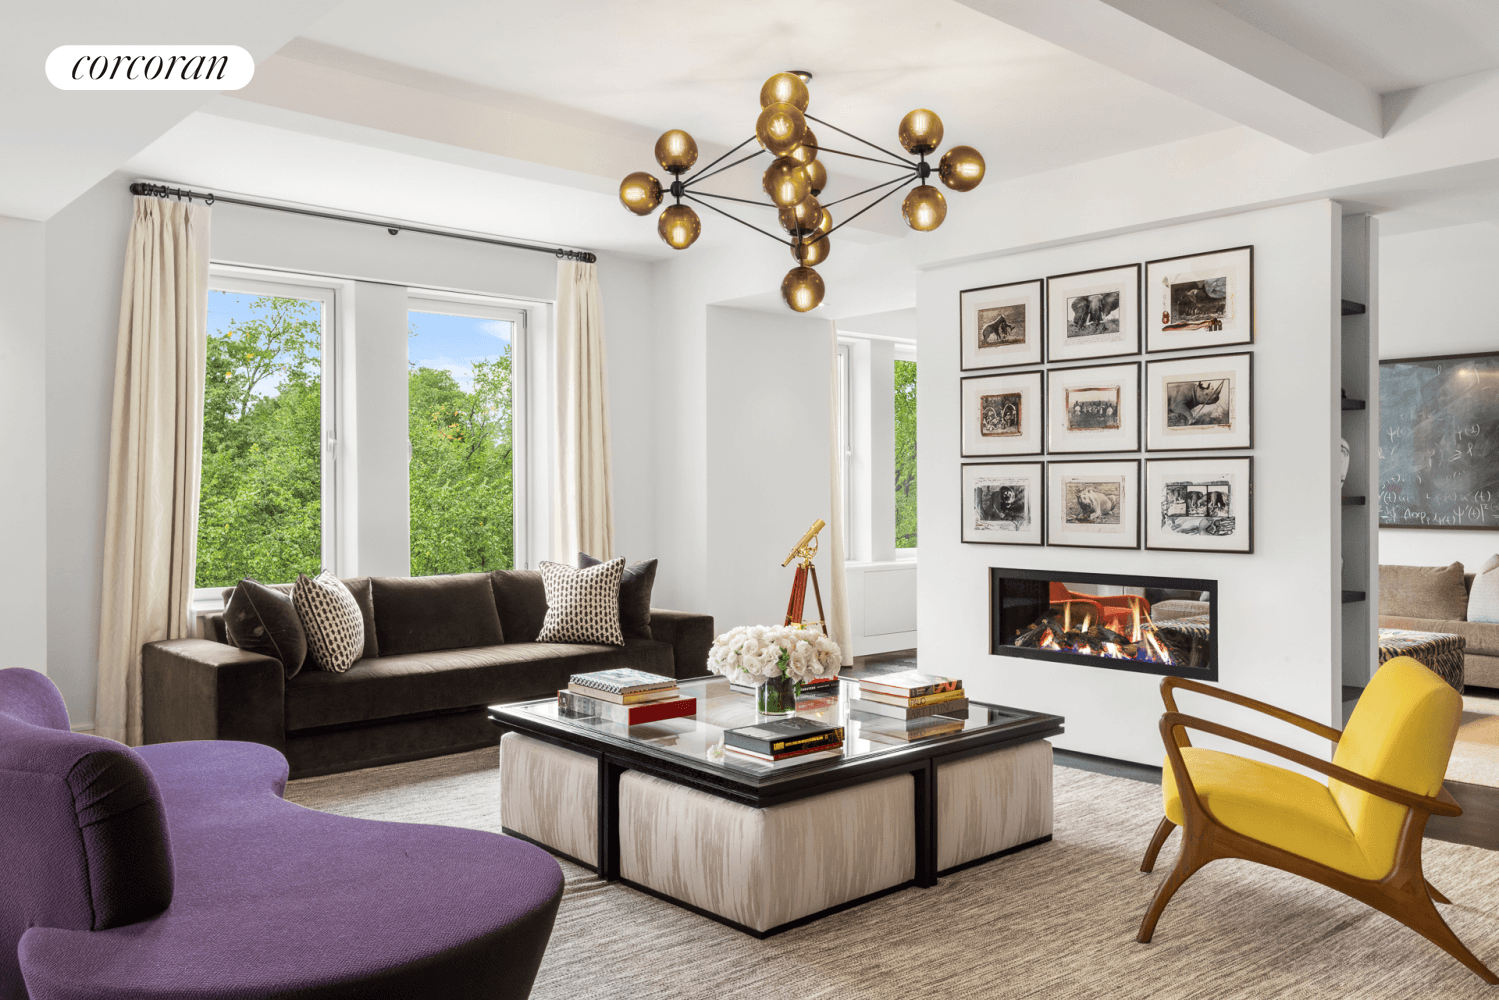 This extraordinary southwest corner prewar Emory Roth duplex condominium is perfectly located on Fifth Avenue with 42 feet of frontage overlooking Central Park with breathtaking views.